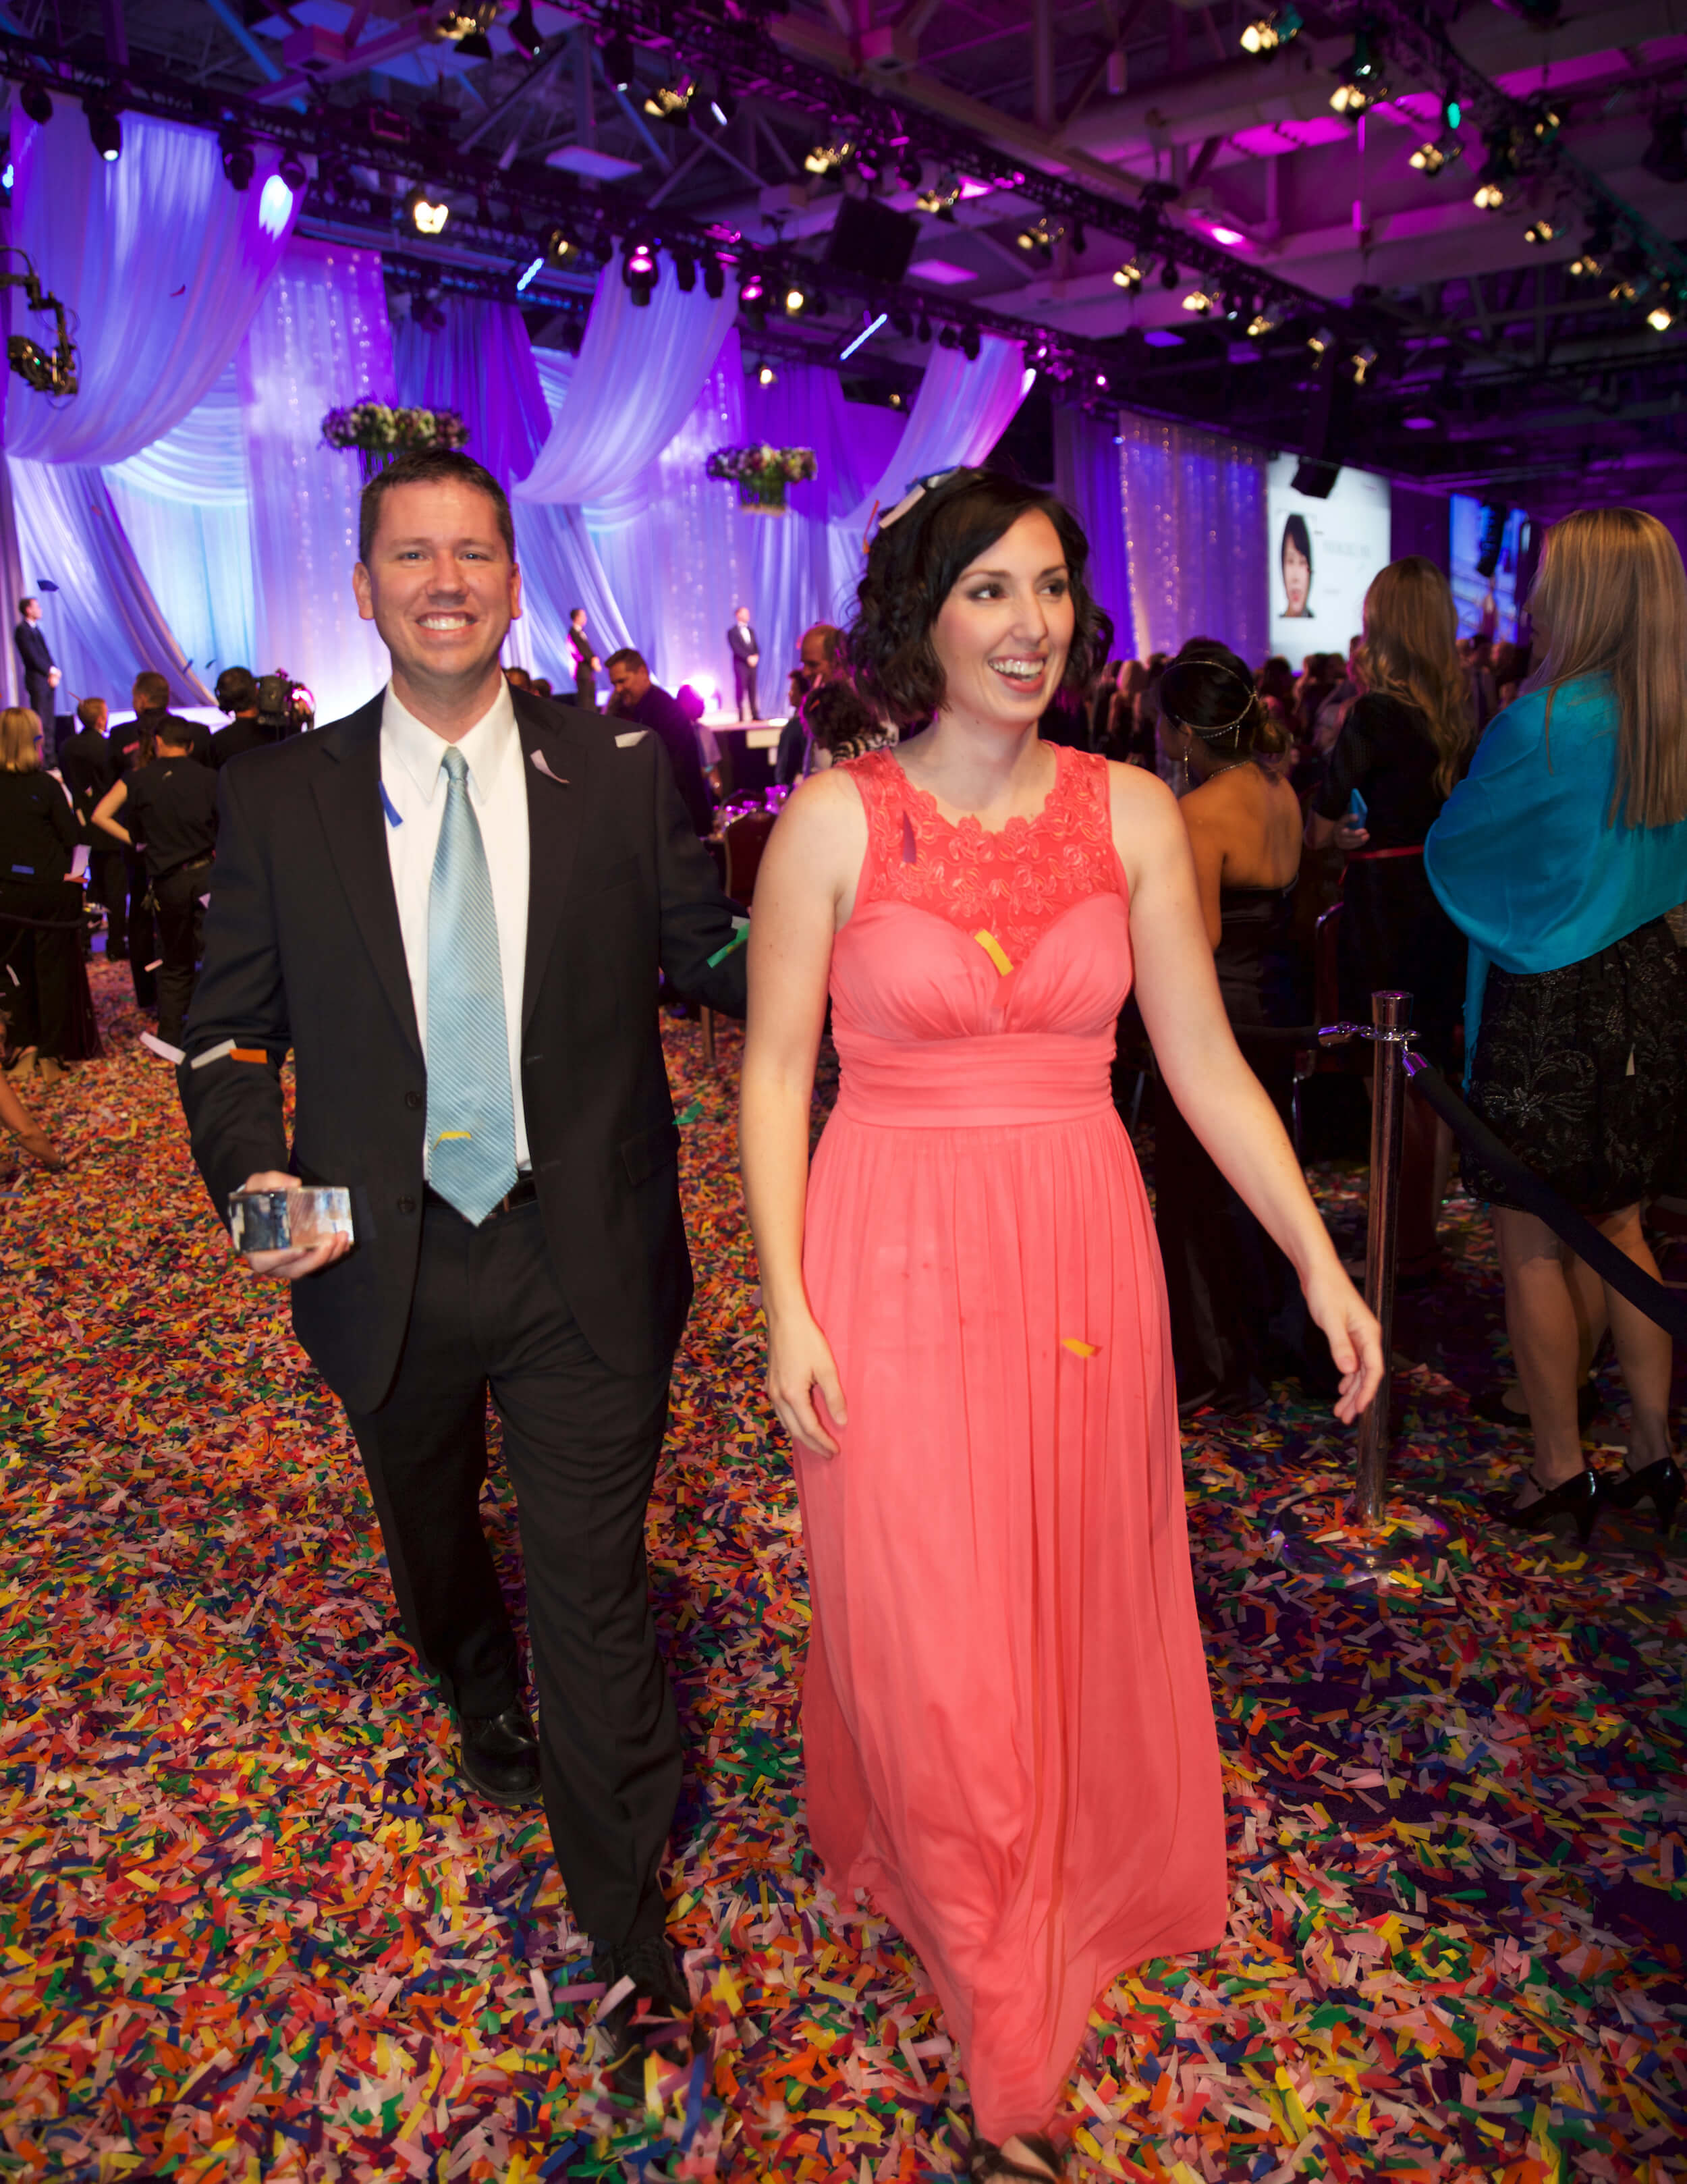 DaNelle & Kevin, at the dōTERRA Gala, awarded for hitting Diamond.